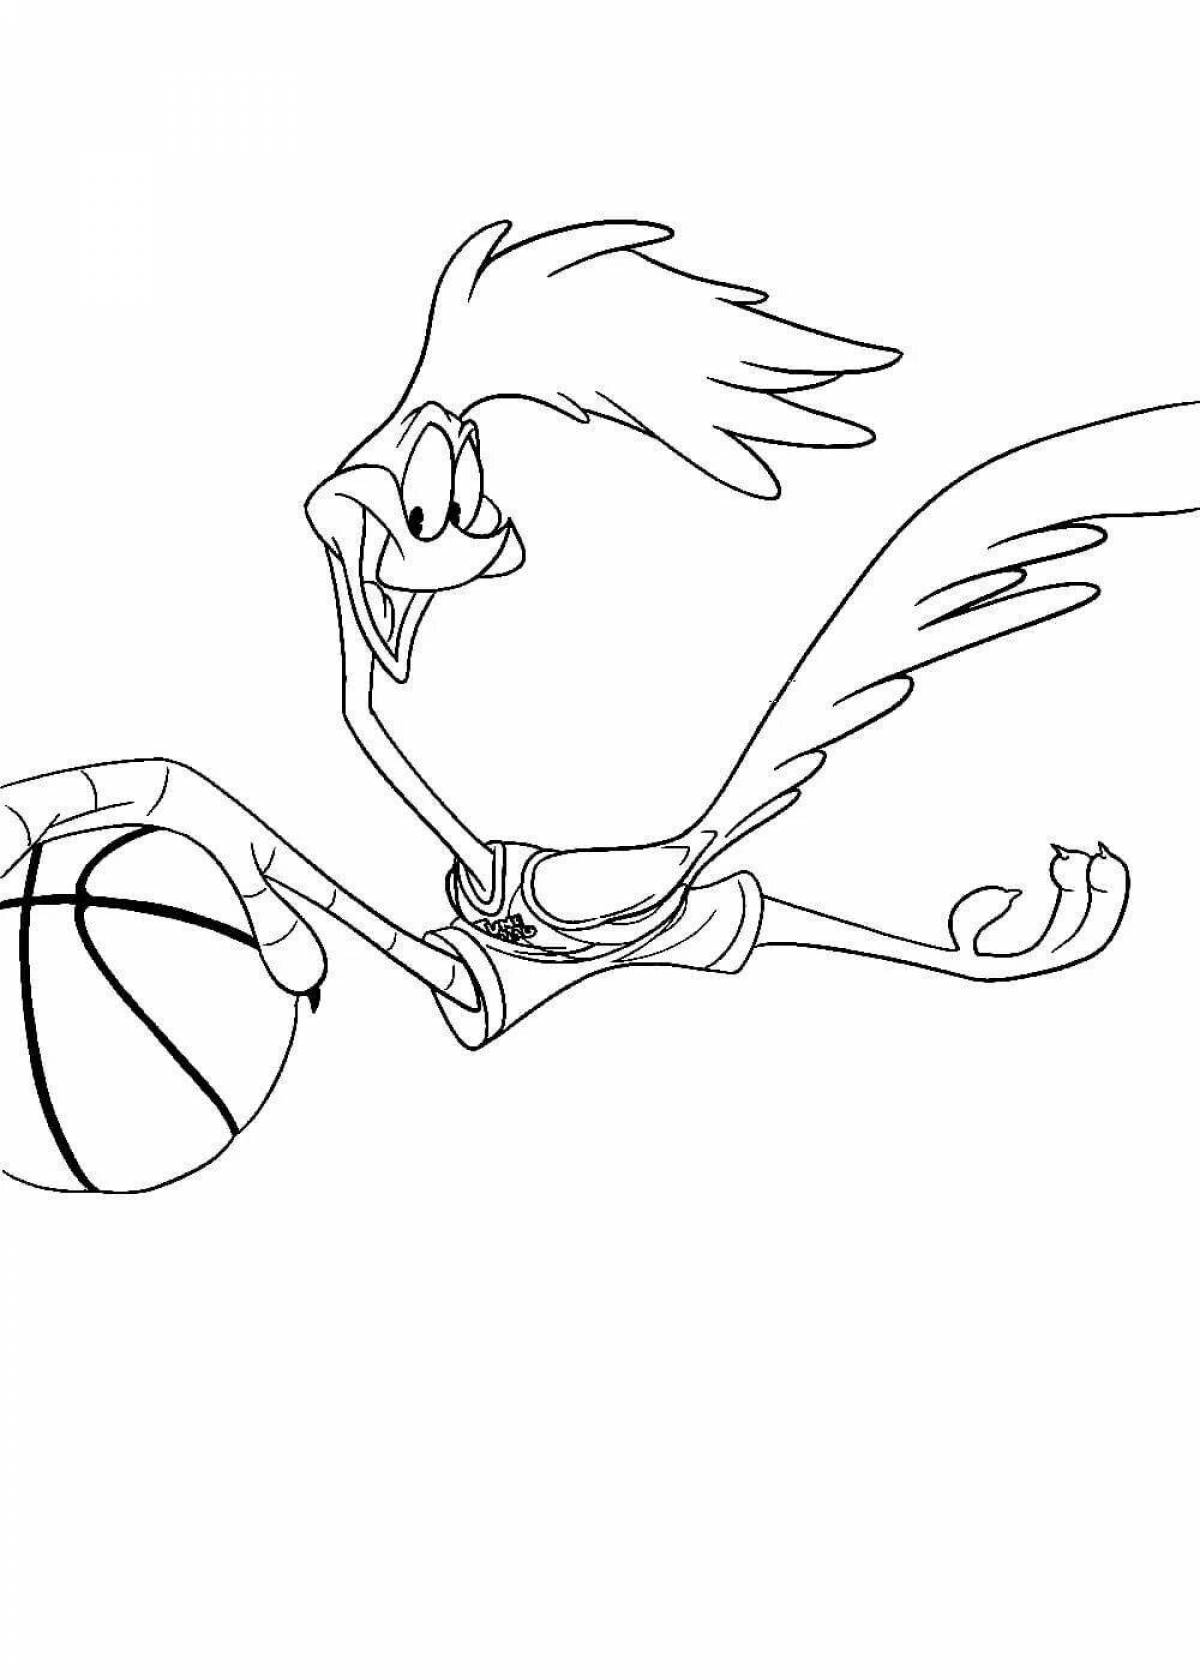 Coloring page funny road runner